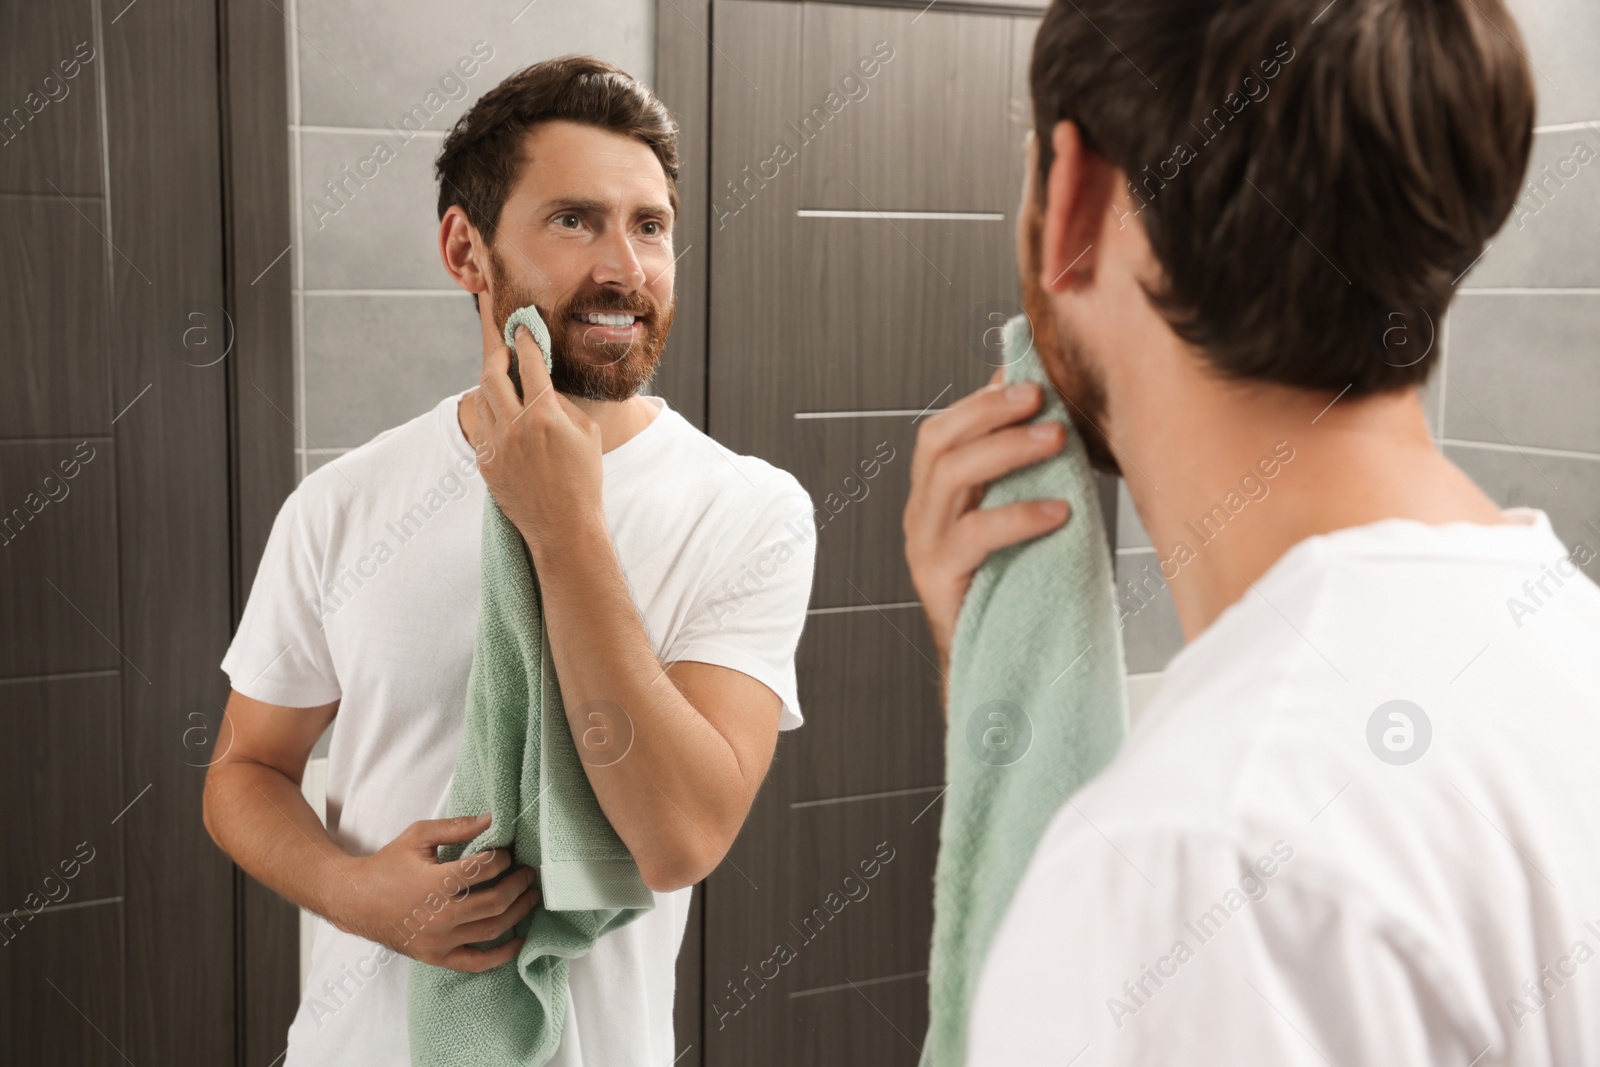 Photo of Handsome man drying his beard in front of mirror in bathroom